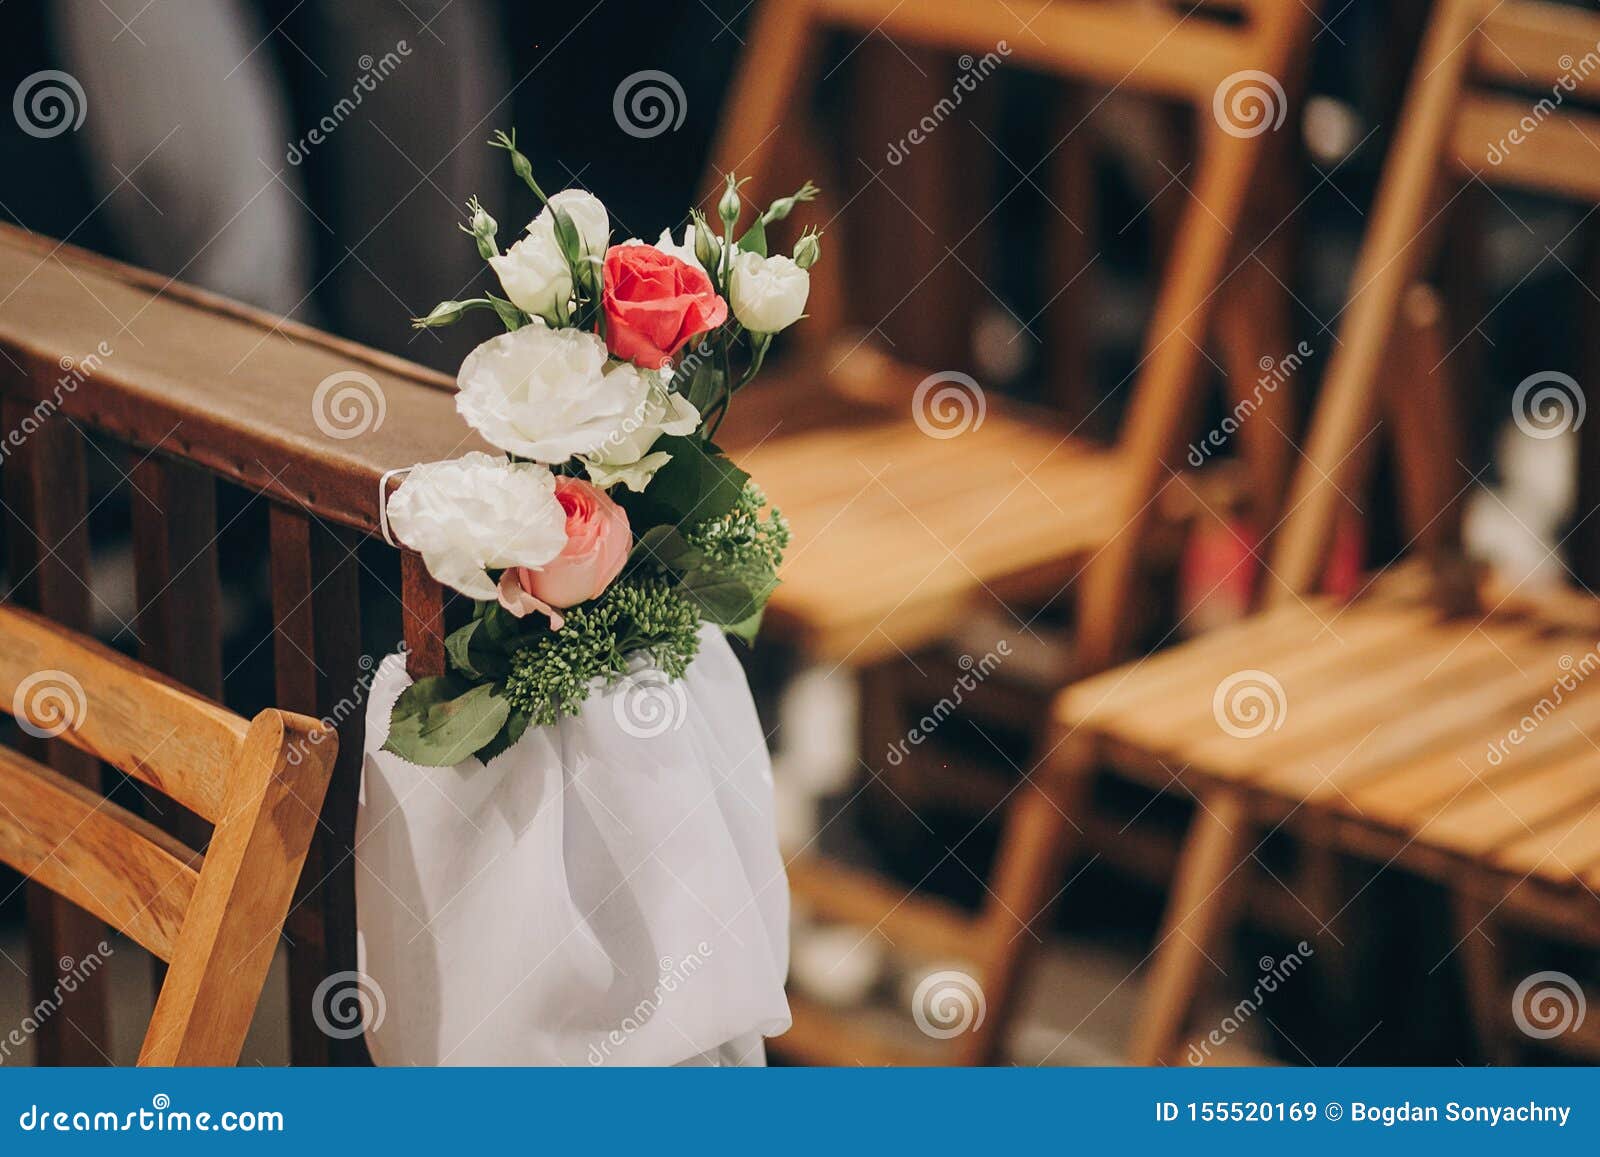 Stylish Wedding Decor Of Wooden Benches In Church For Holy